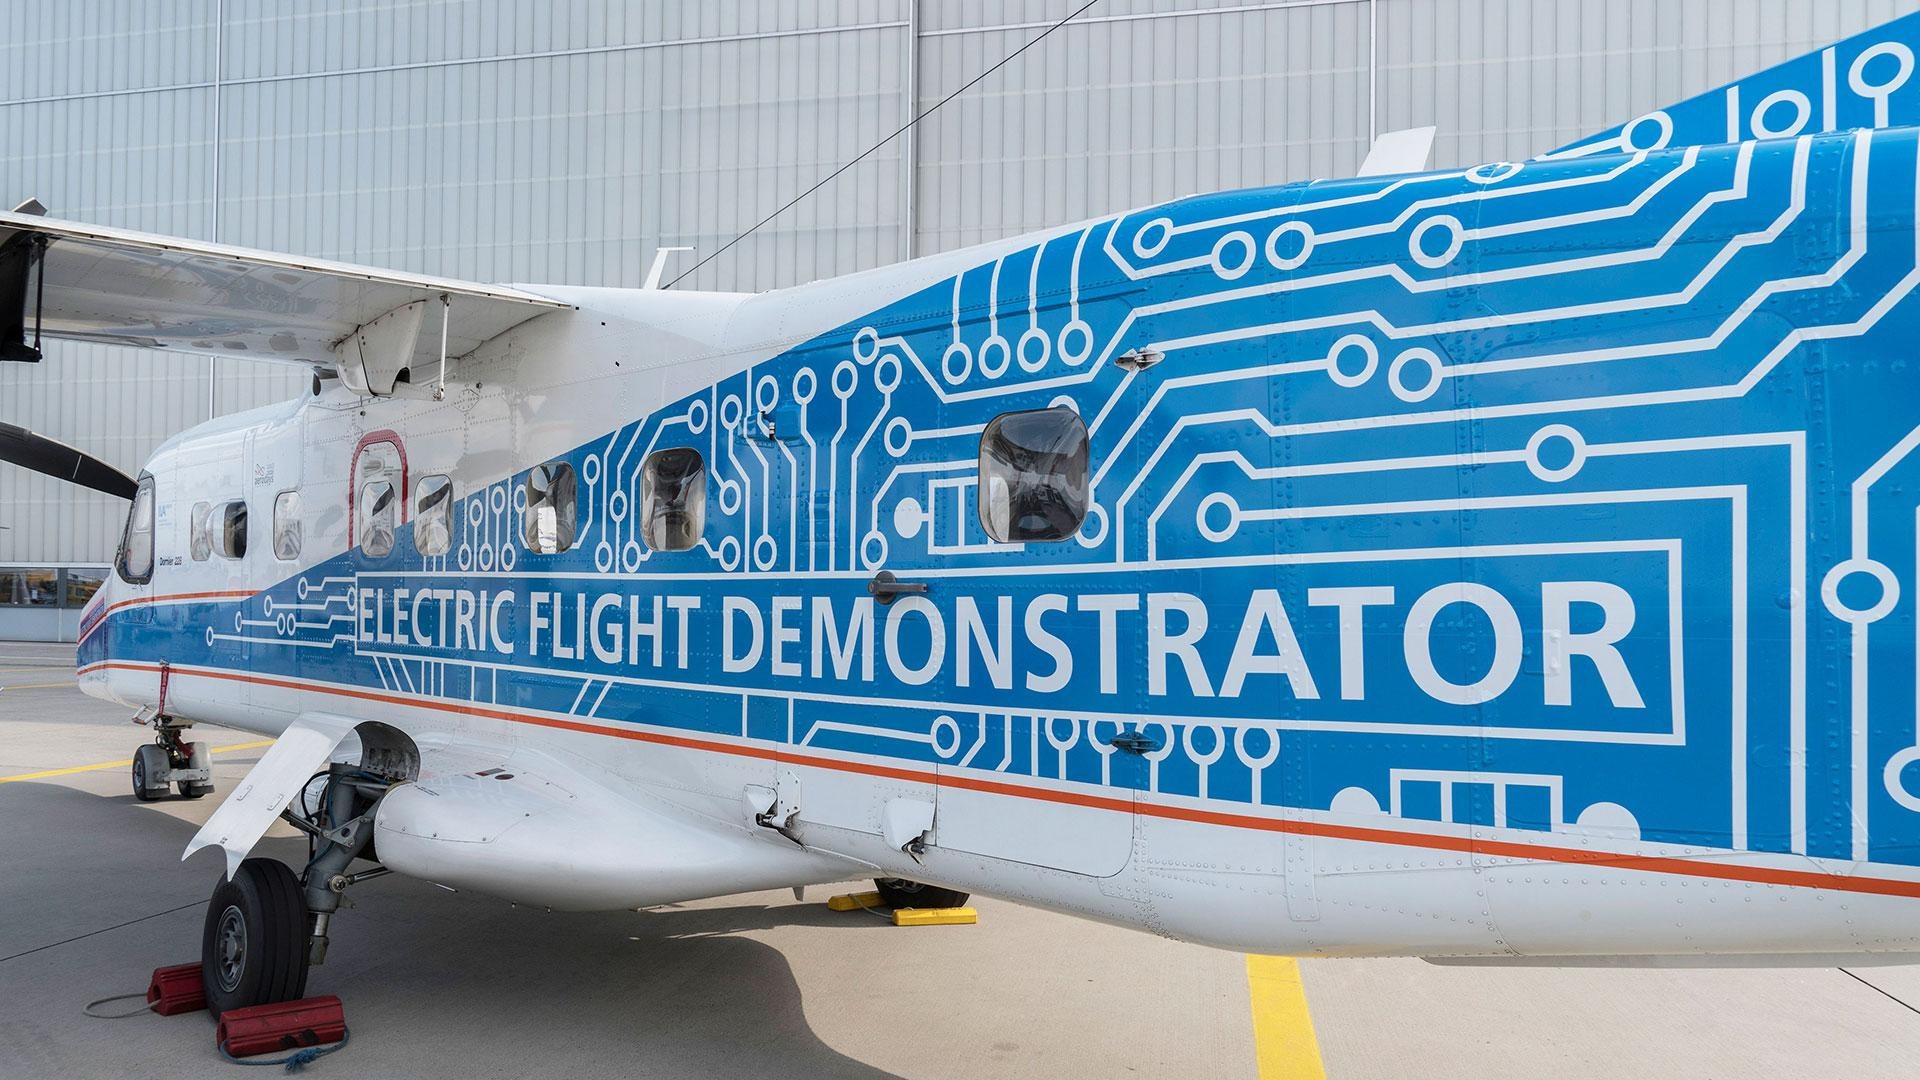 DLR’s DO 228, D-CFFU as the ‘Electric Flight Demonstrator’, with a special sticker